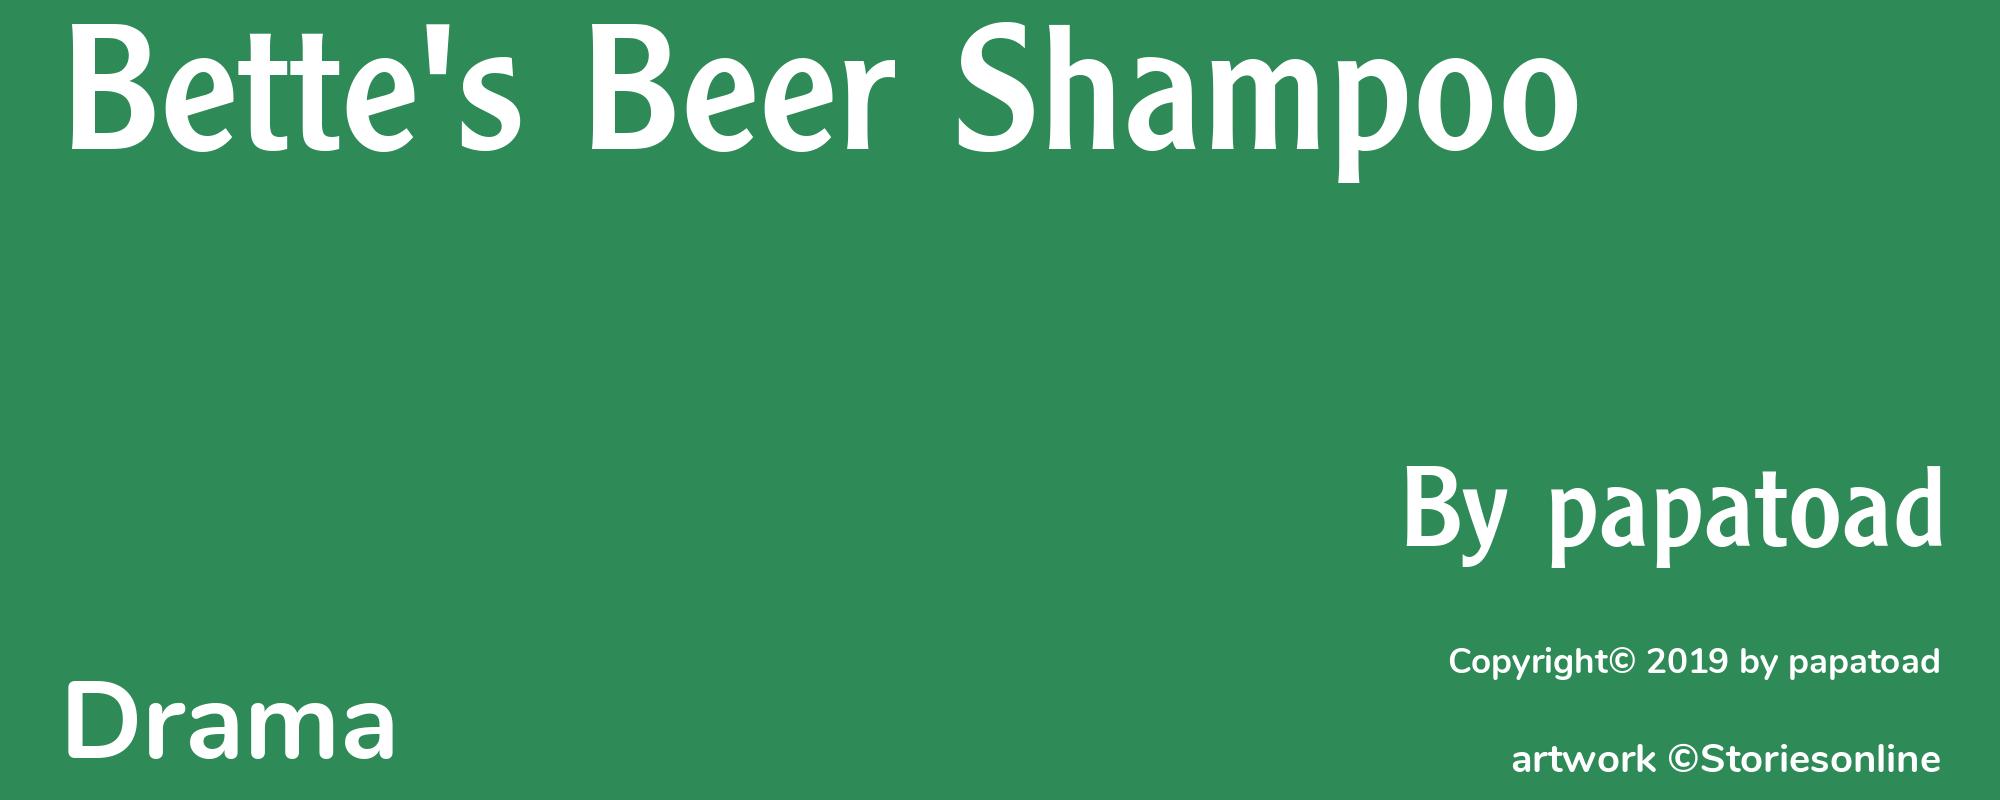 Bette's Beer Shampoo - Cover